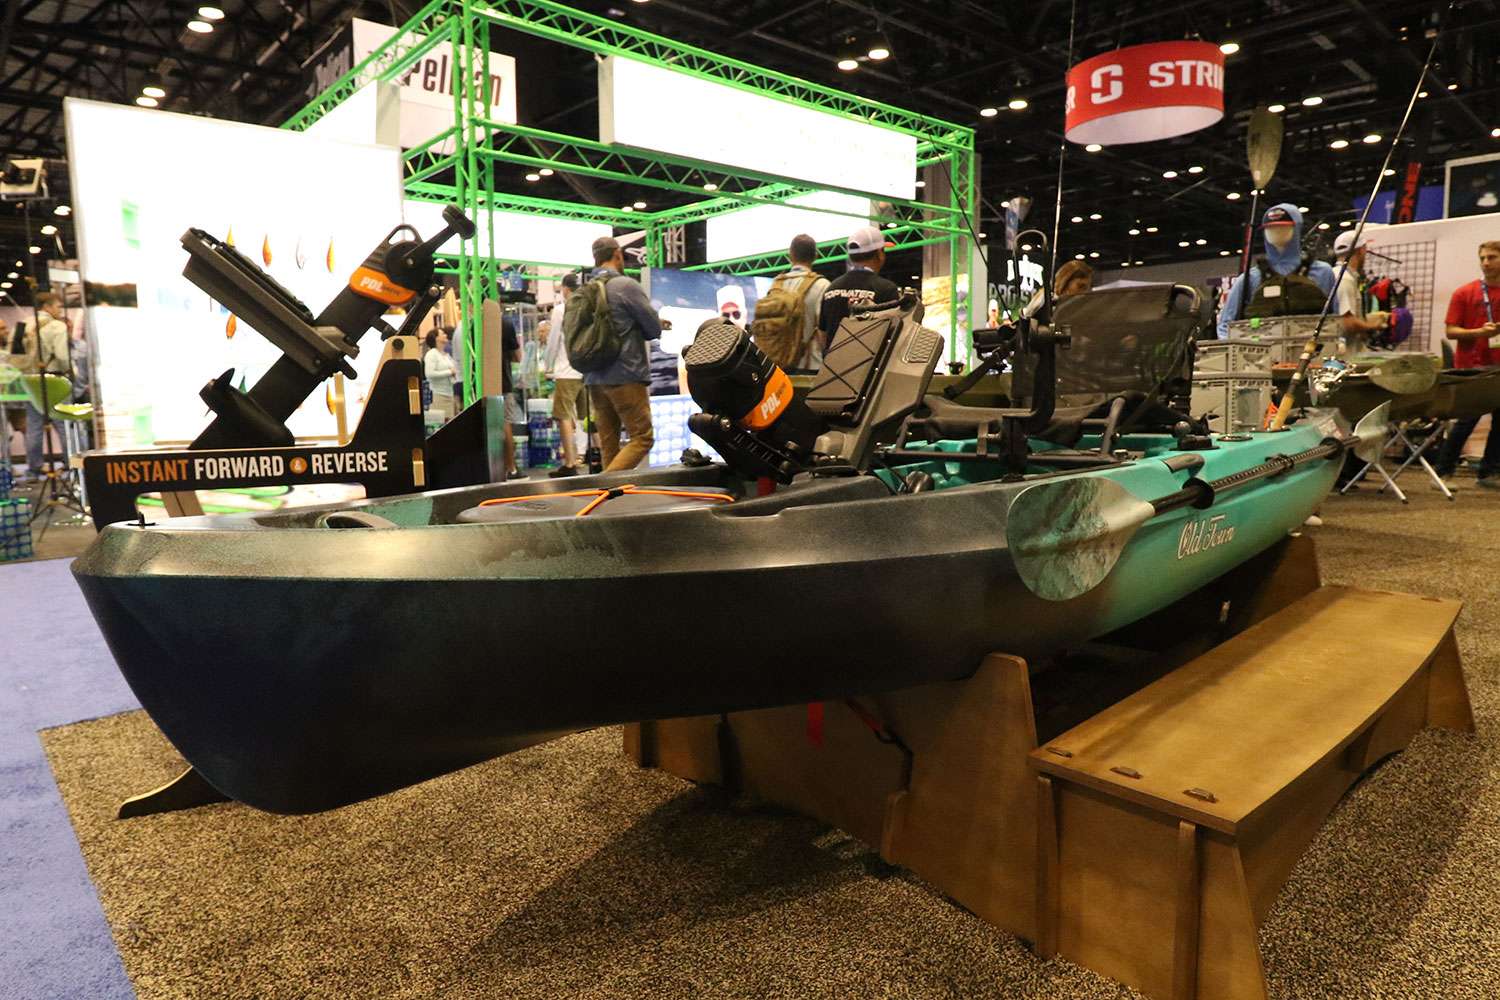 The new Topwater 12 PDL was on display and fully rigged.